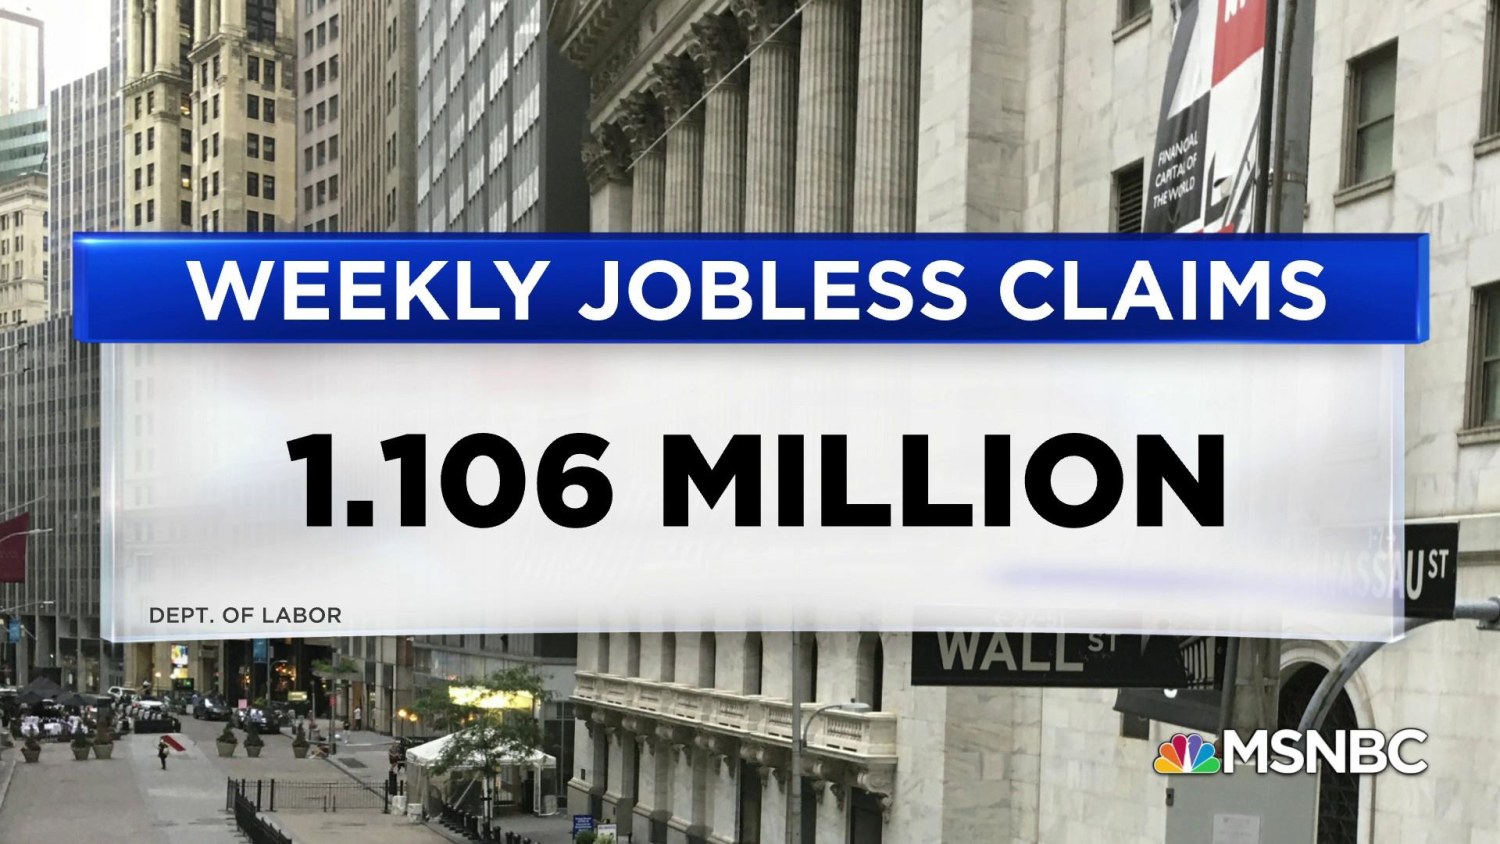 Weekly initial jobless claims hit 2.1 million